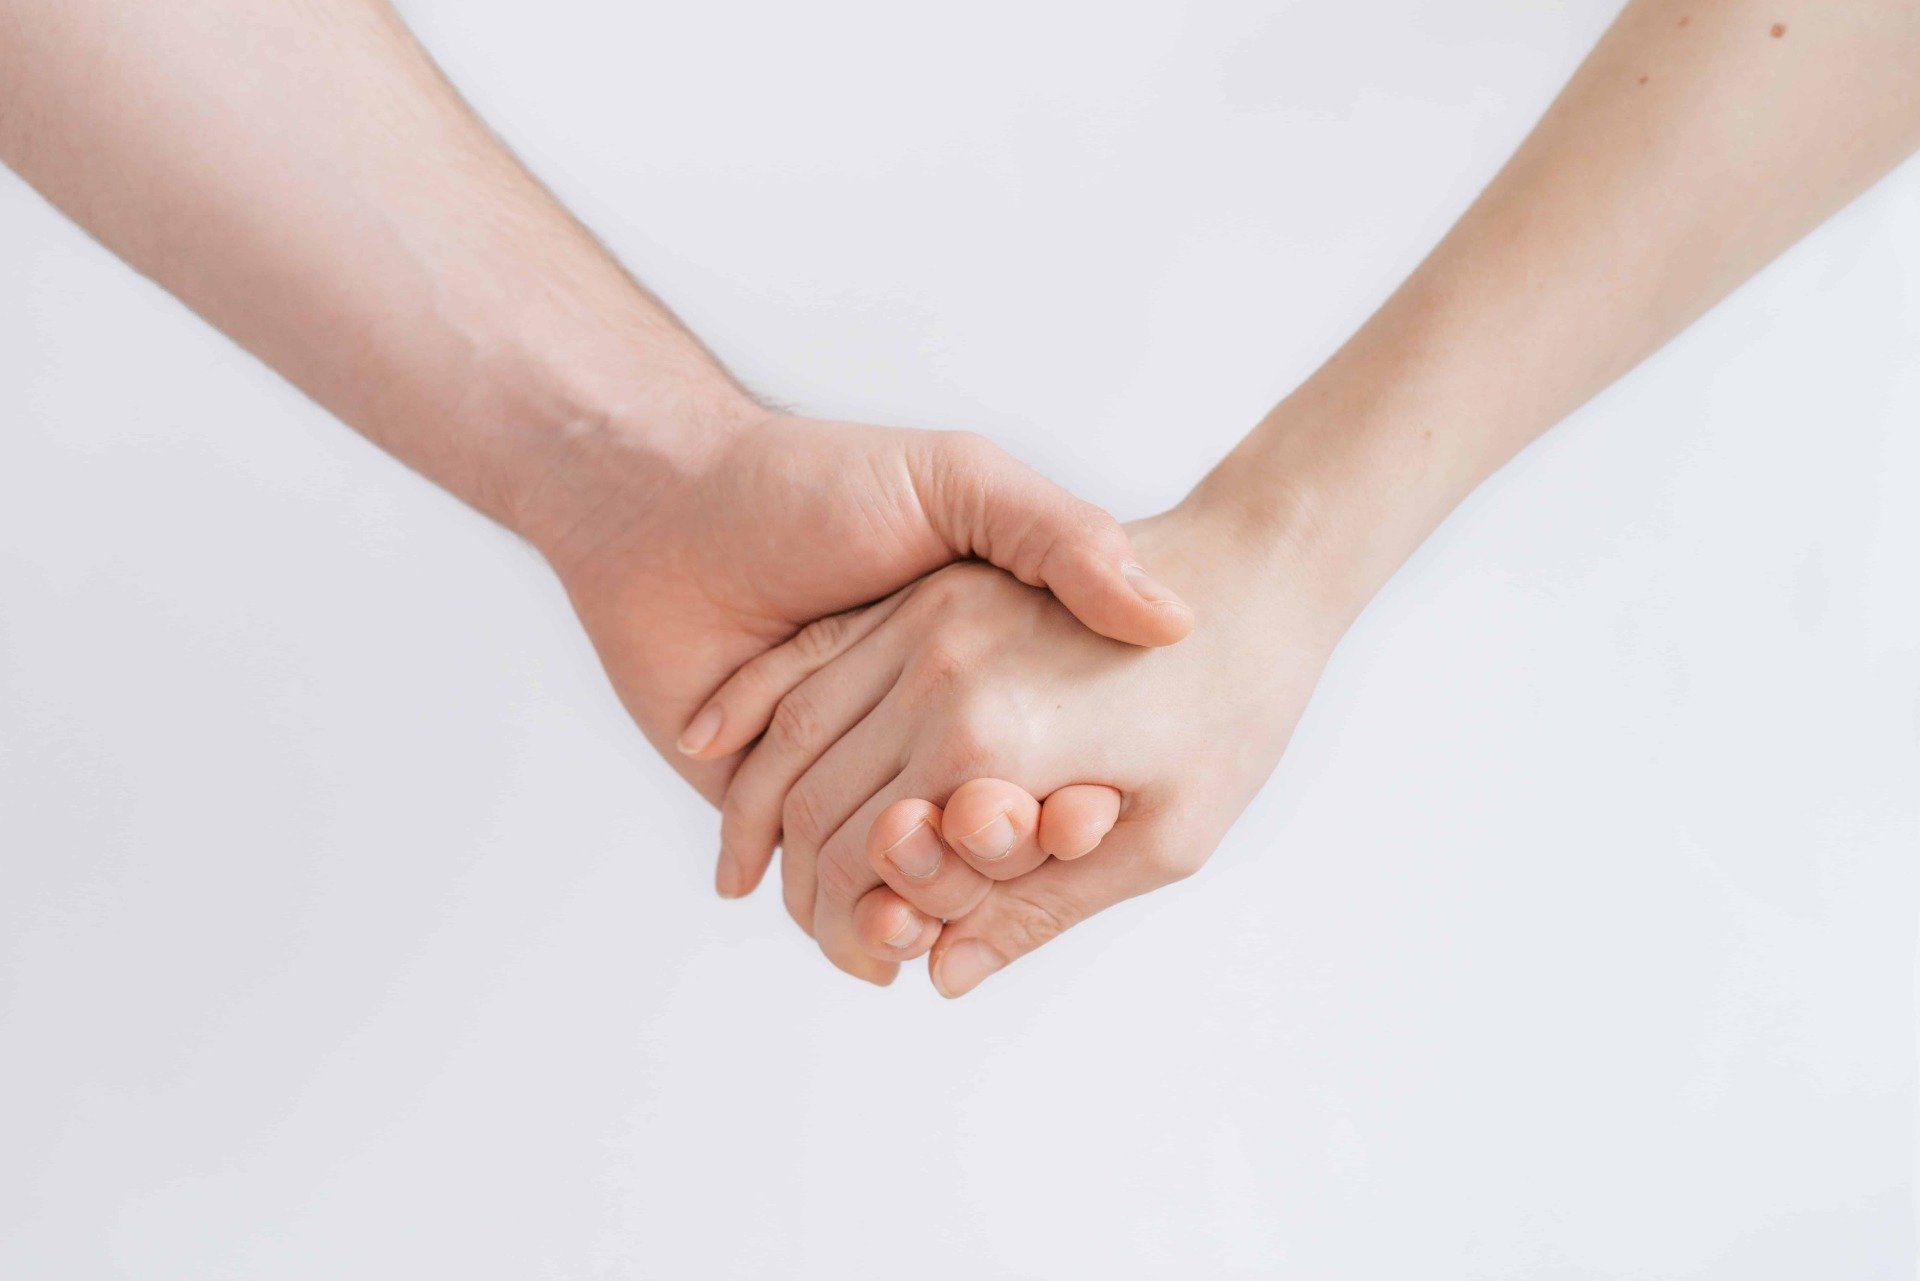 A man and a woman are holding hands on a white background.